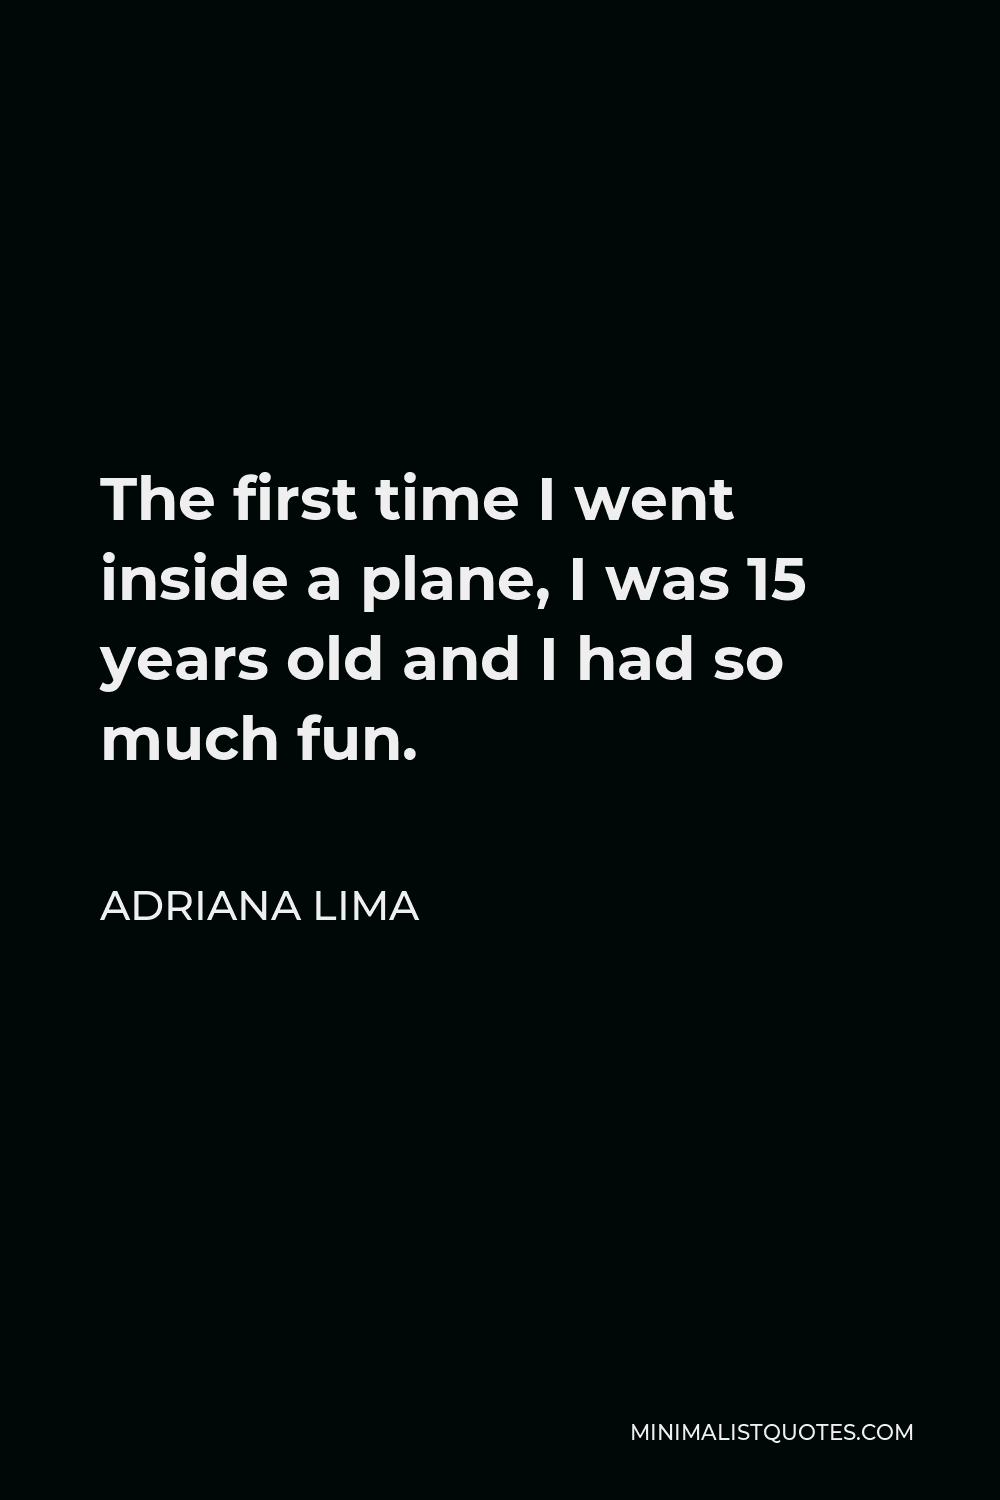 Adriana Lima Quote - The first time I went inside a plane, I was 15 years old and I had so much fun.